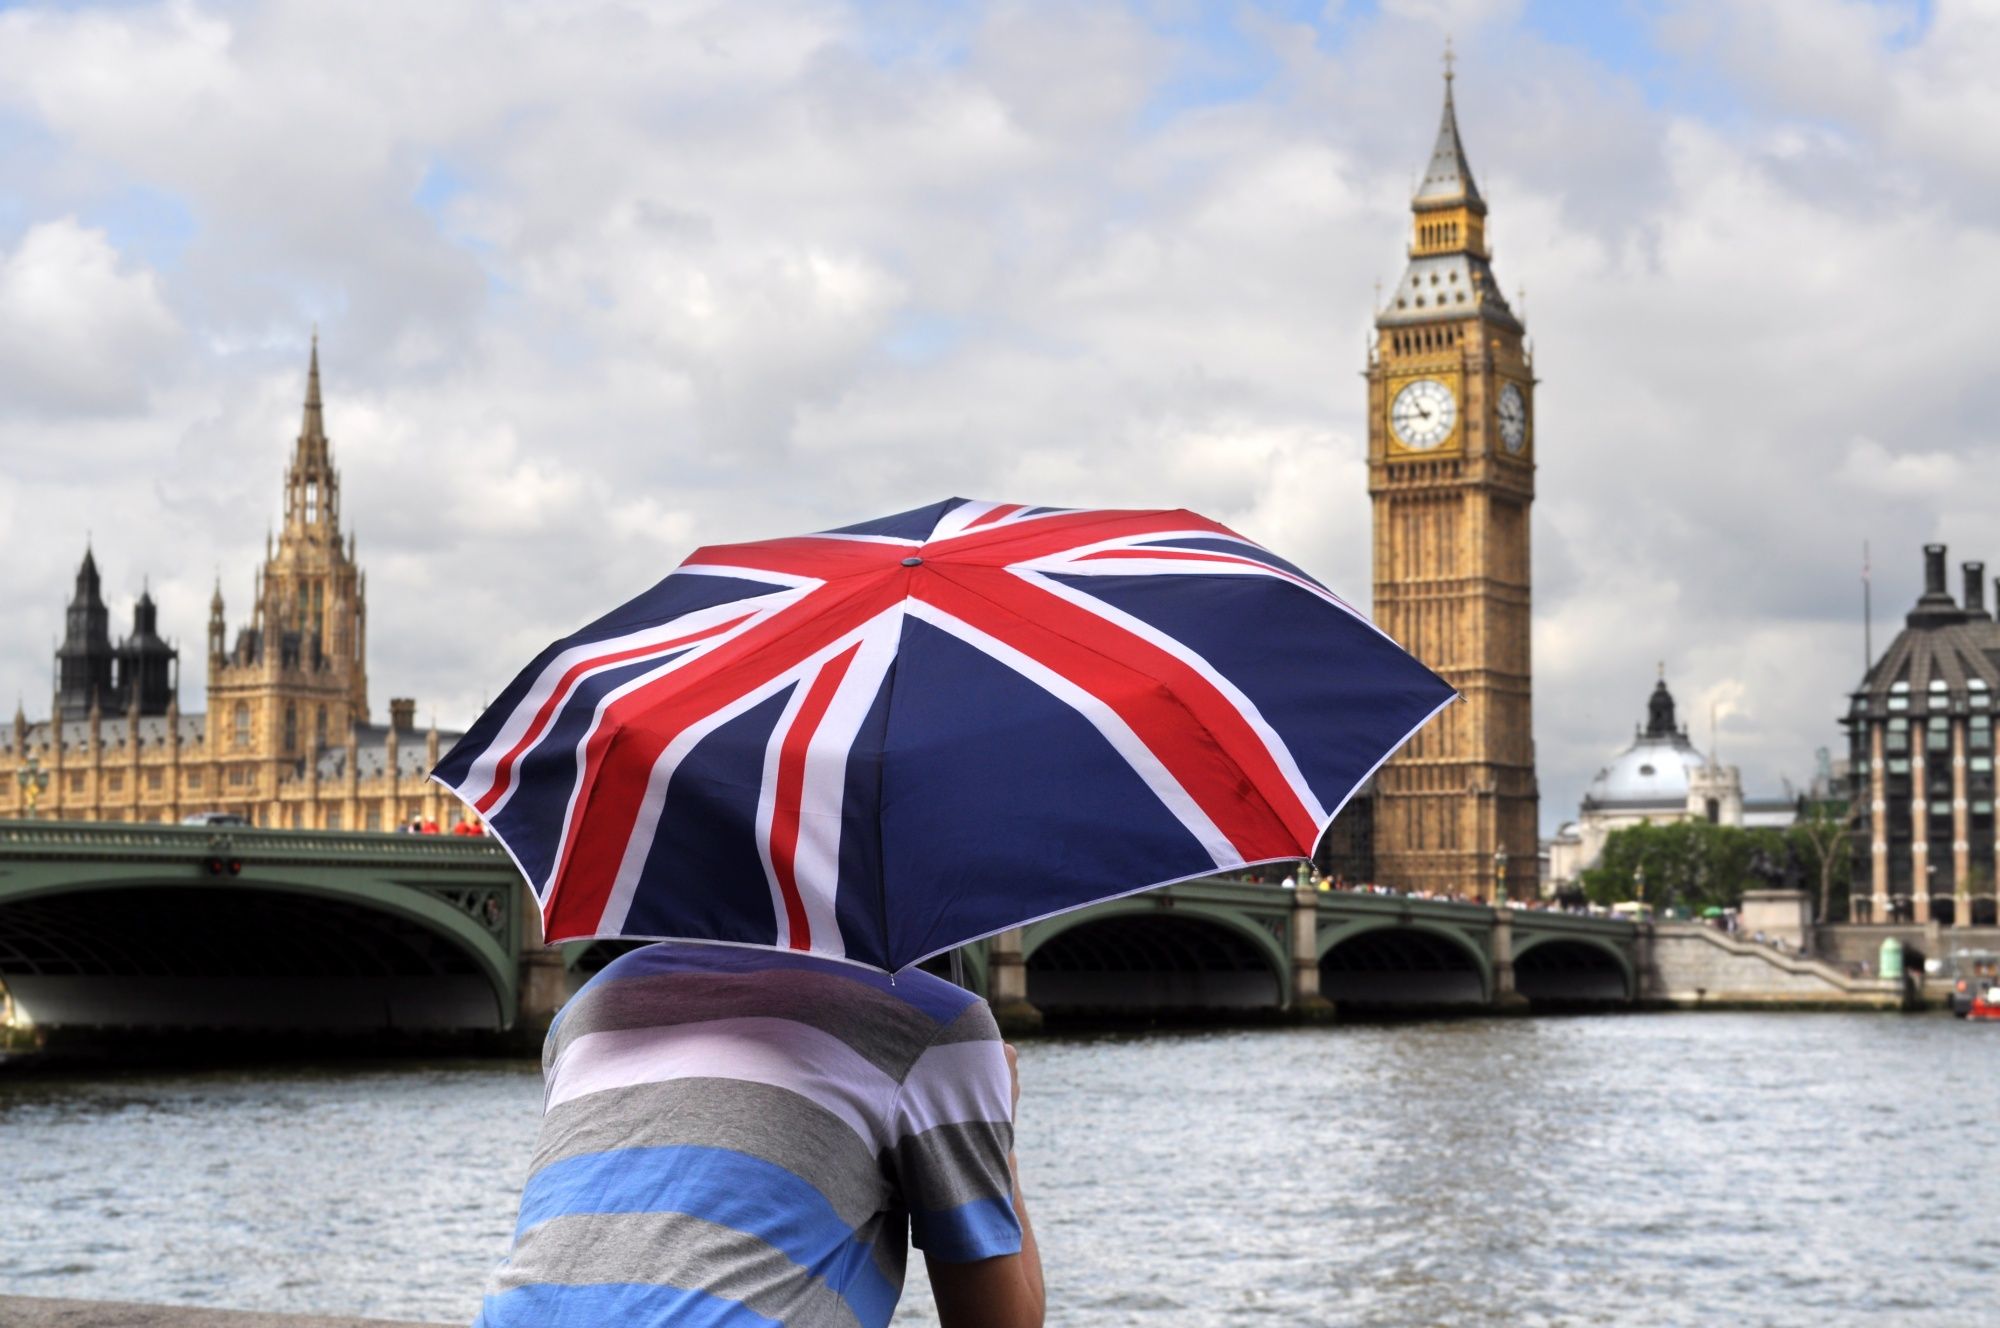 A person holding an umbrella with the British flag on it in front of Big Ben in London.